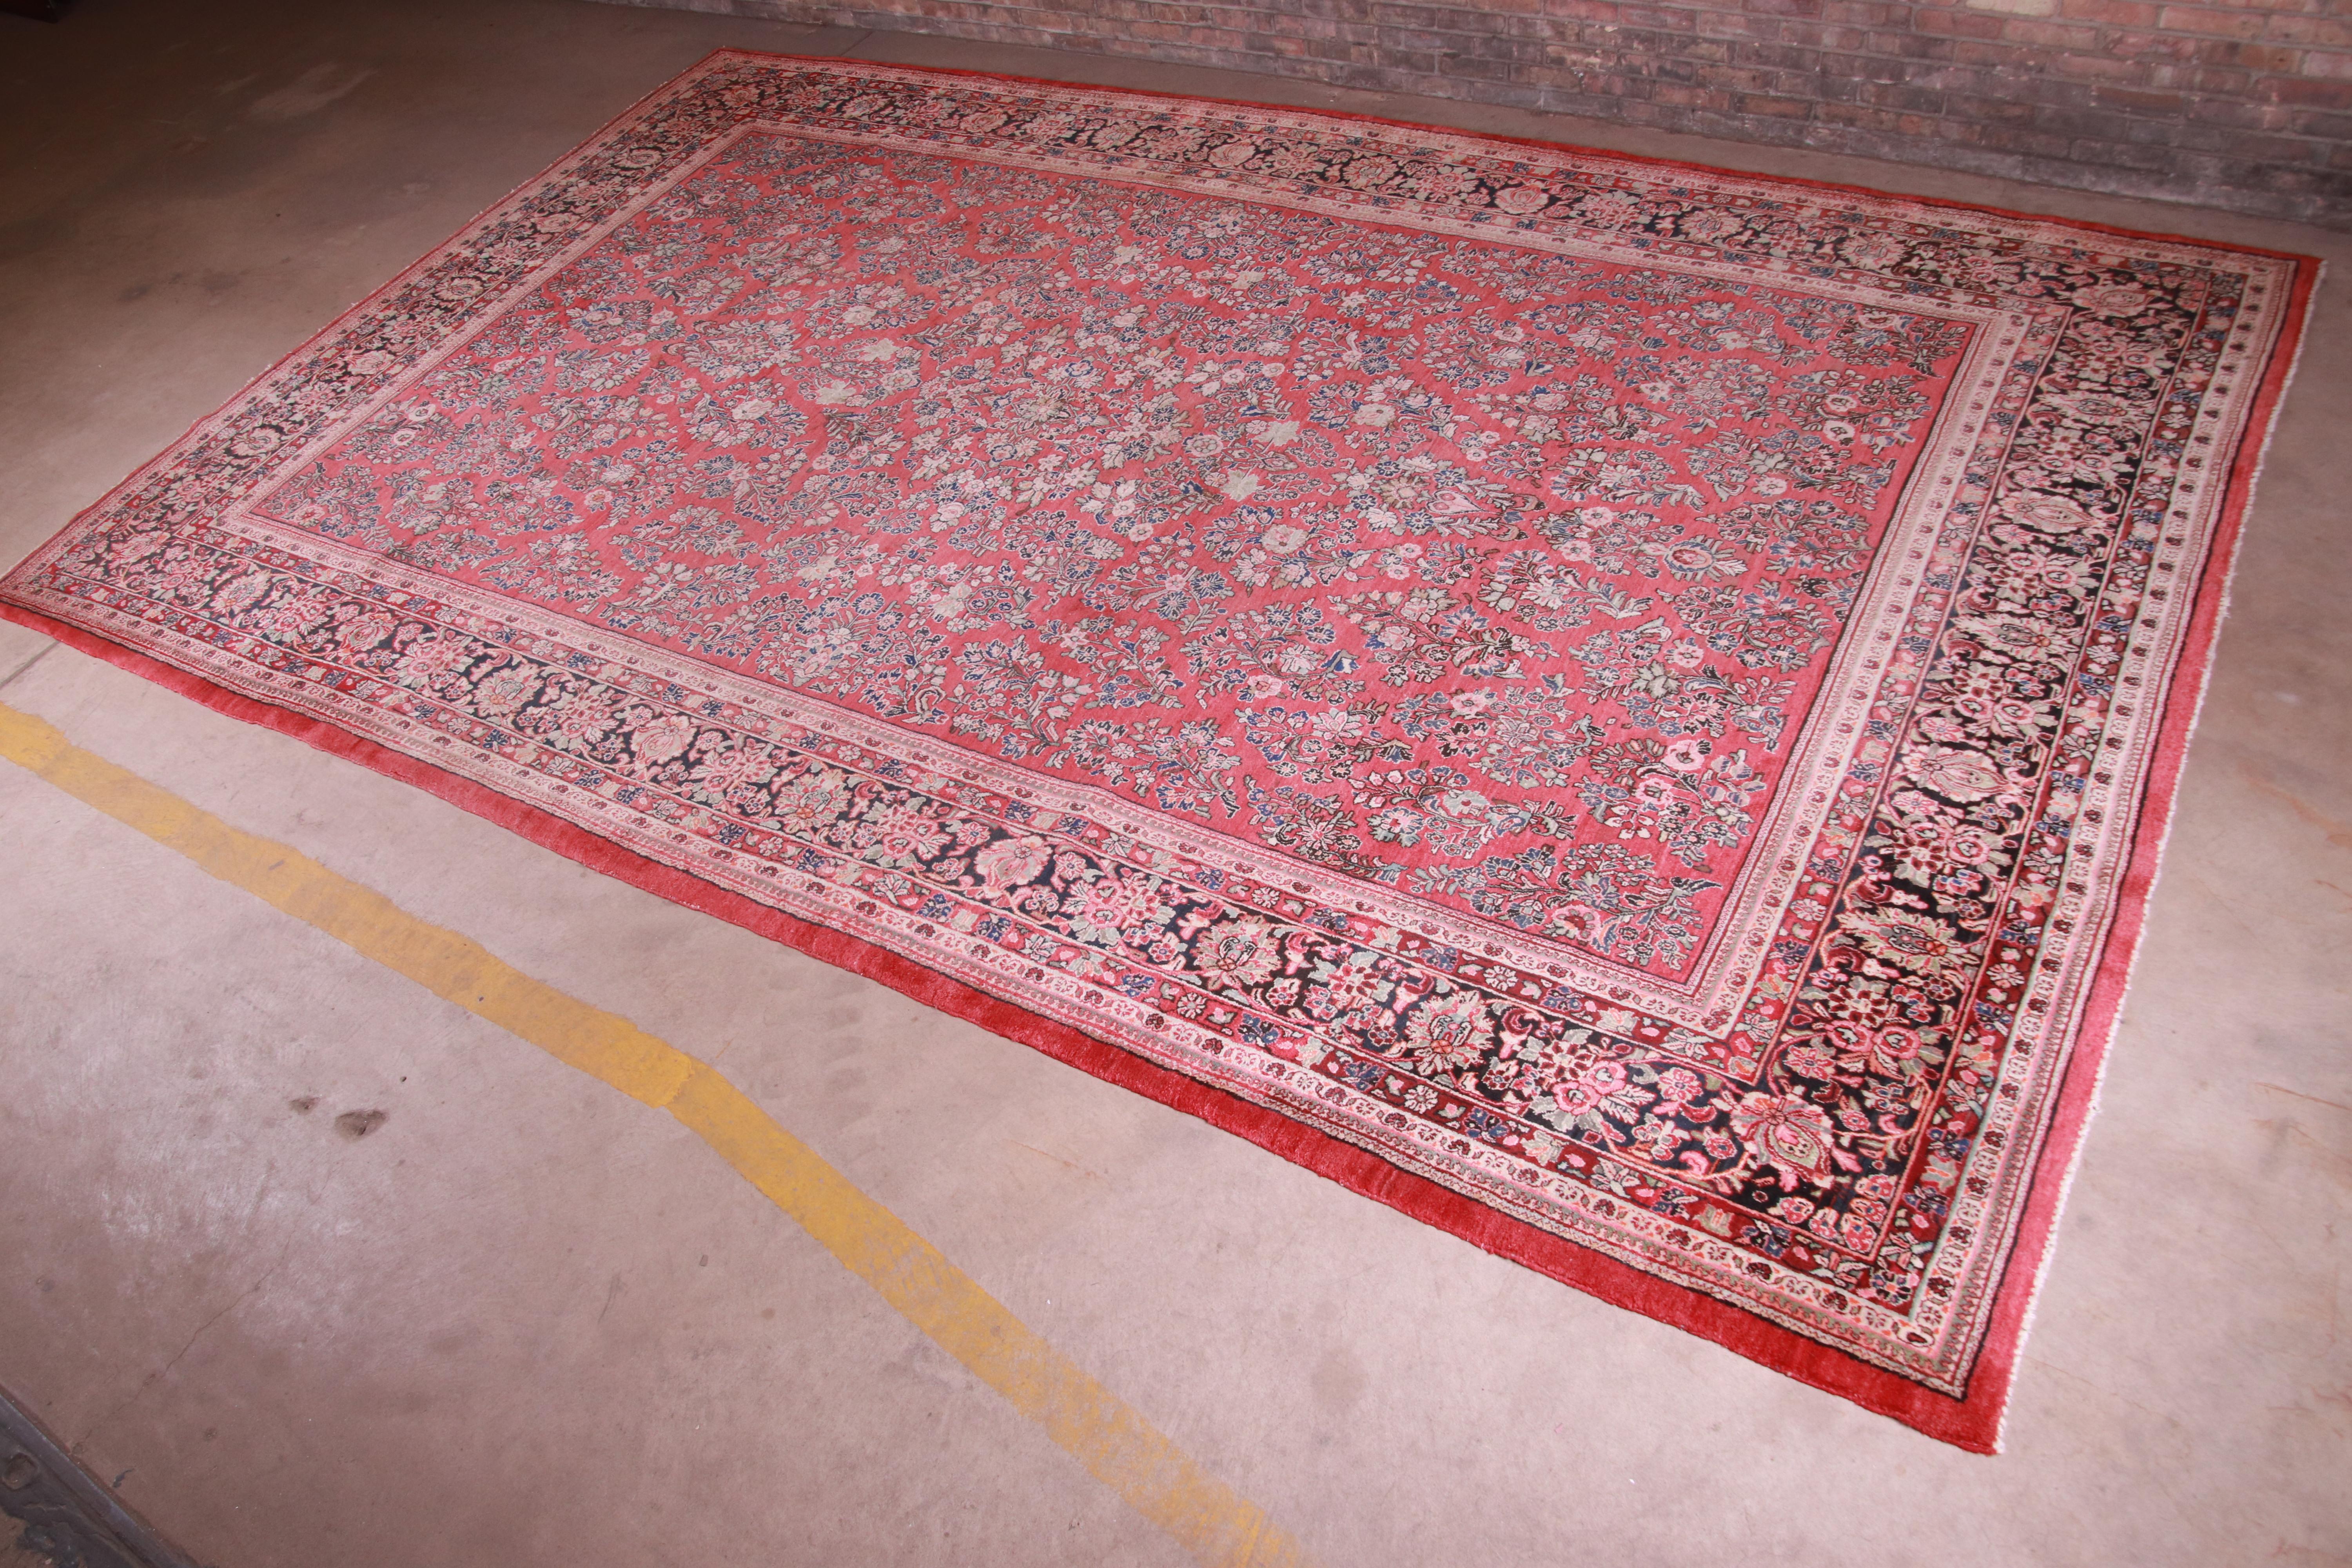 Semi-Antique Hand-Knotted Persian Sarouk Room Size Rug, circa 1940s In Good Condition For Sale In South Bend, IN